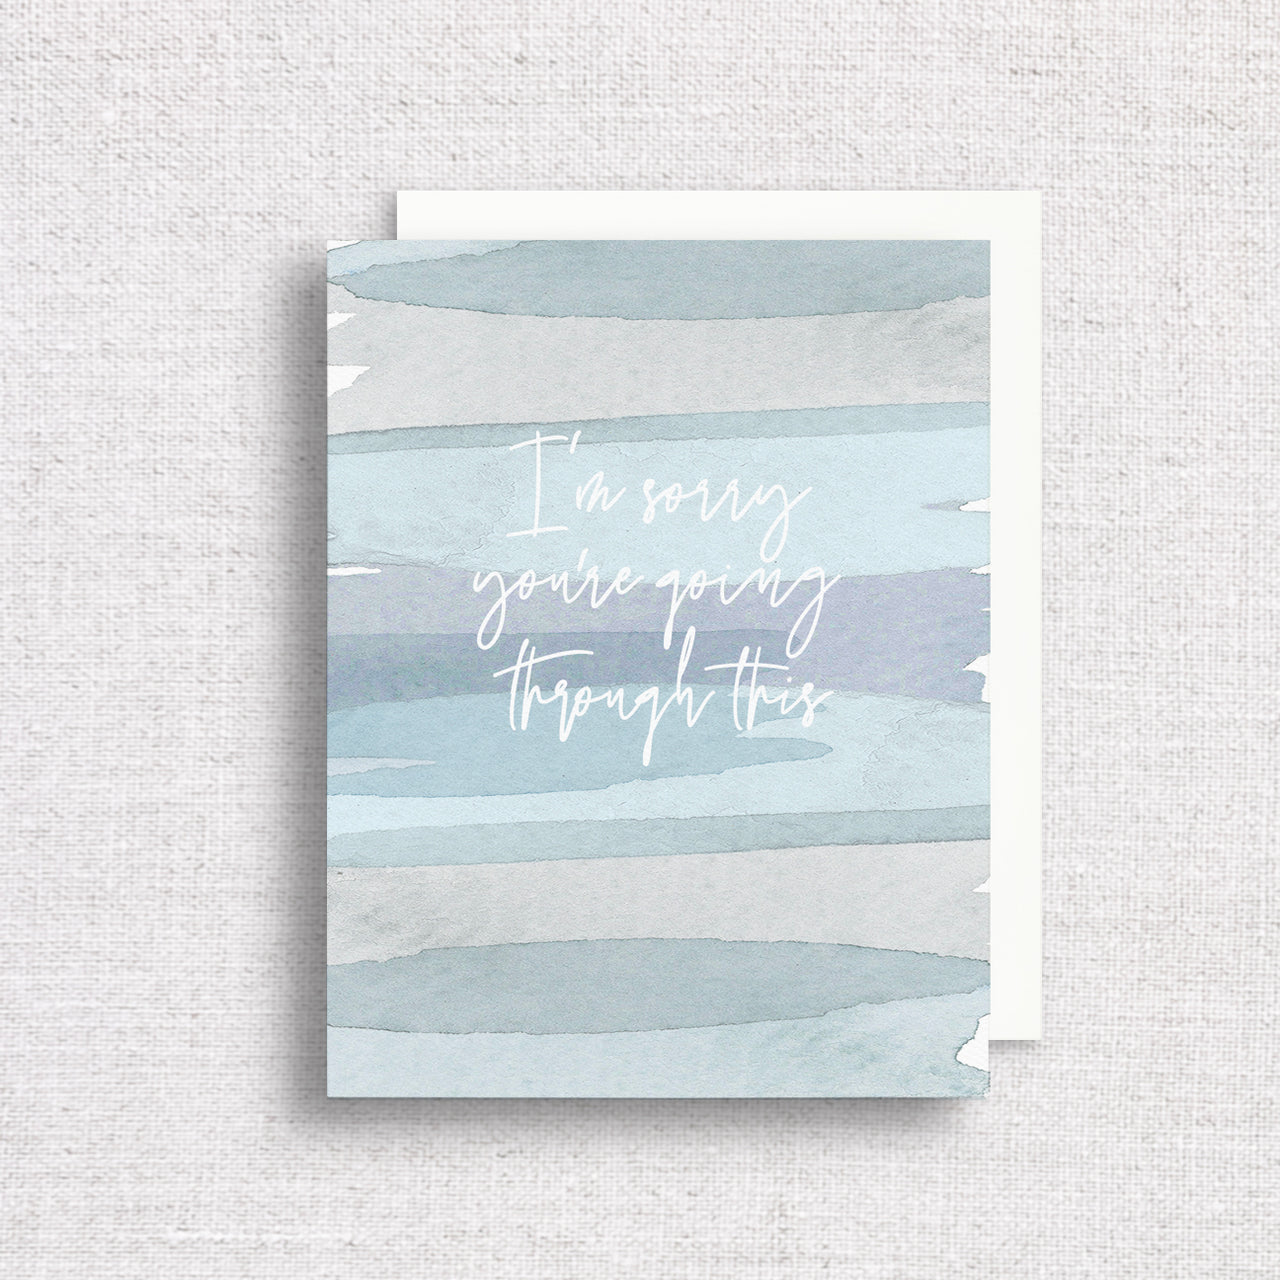 "I'm Sorry You're Going Through This" Greeting Card